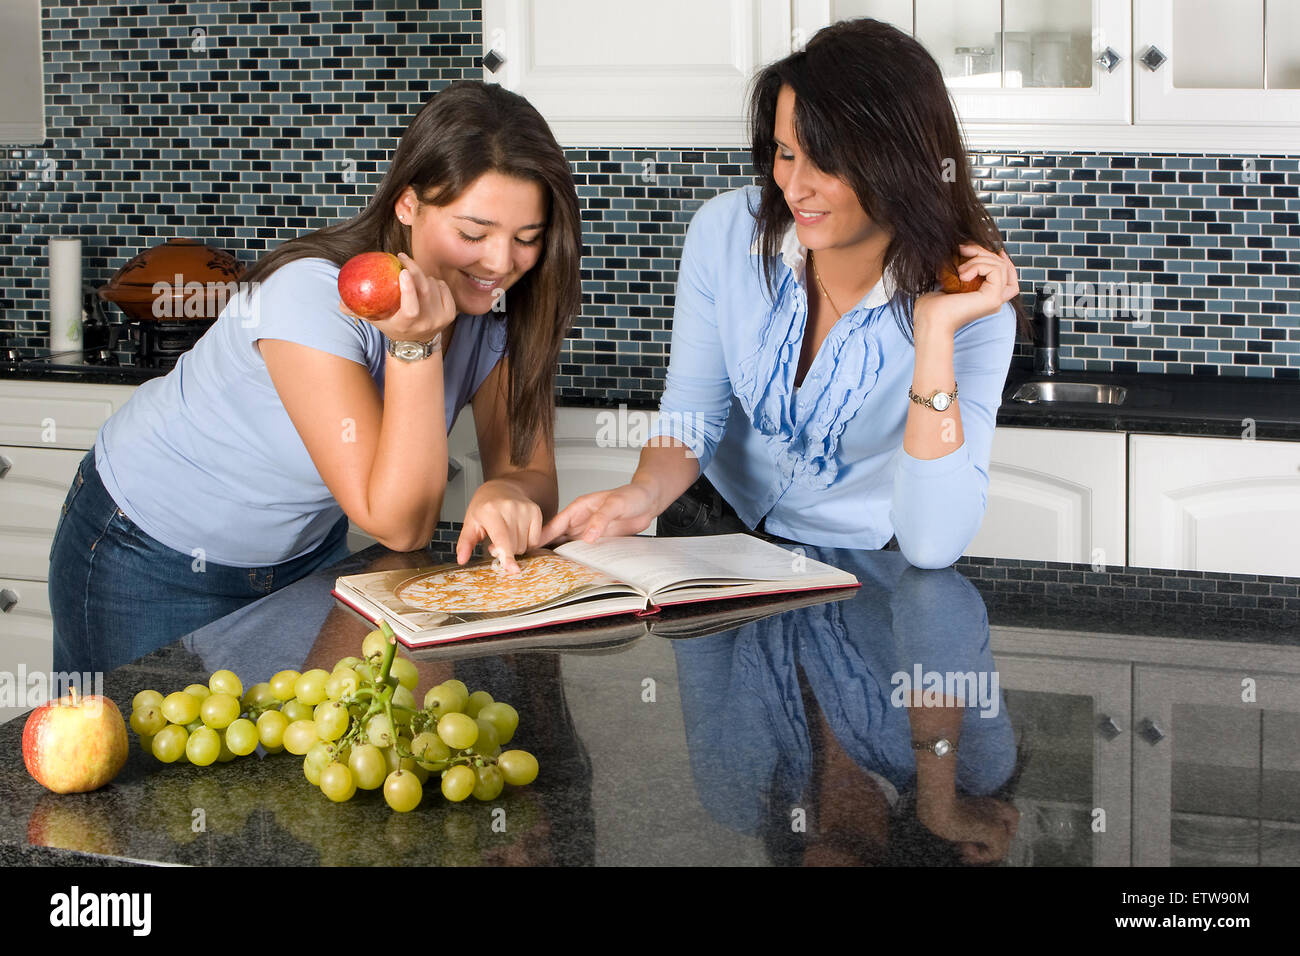 Two friends discussing recipes over a cookbook Stock Photo